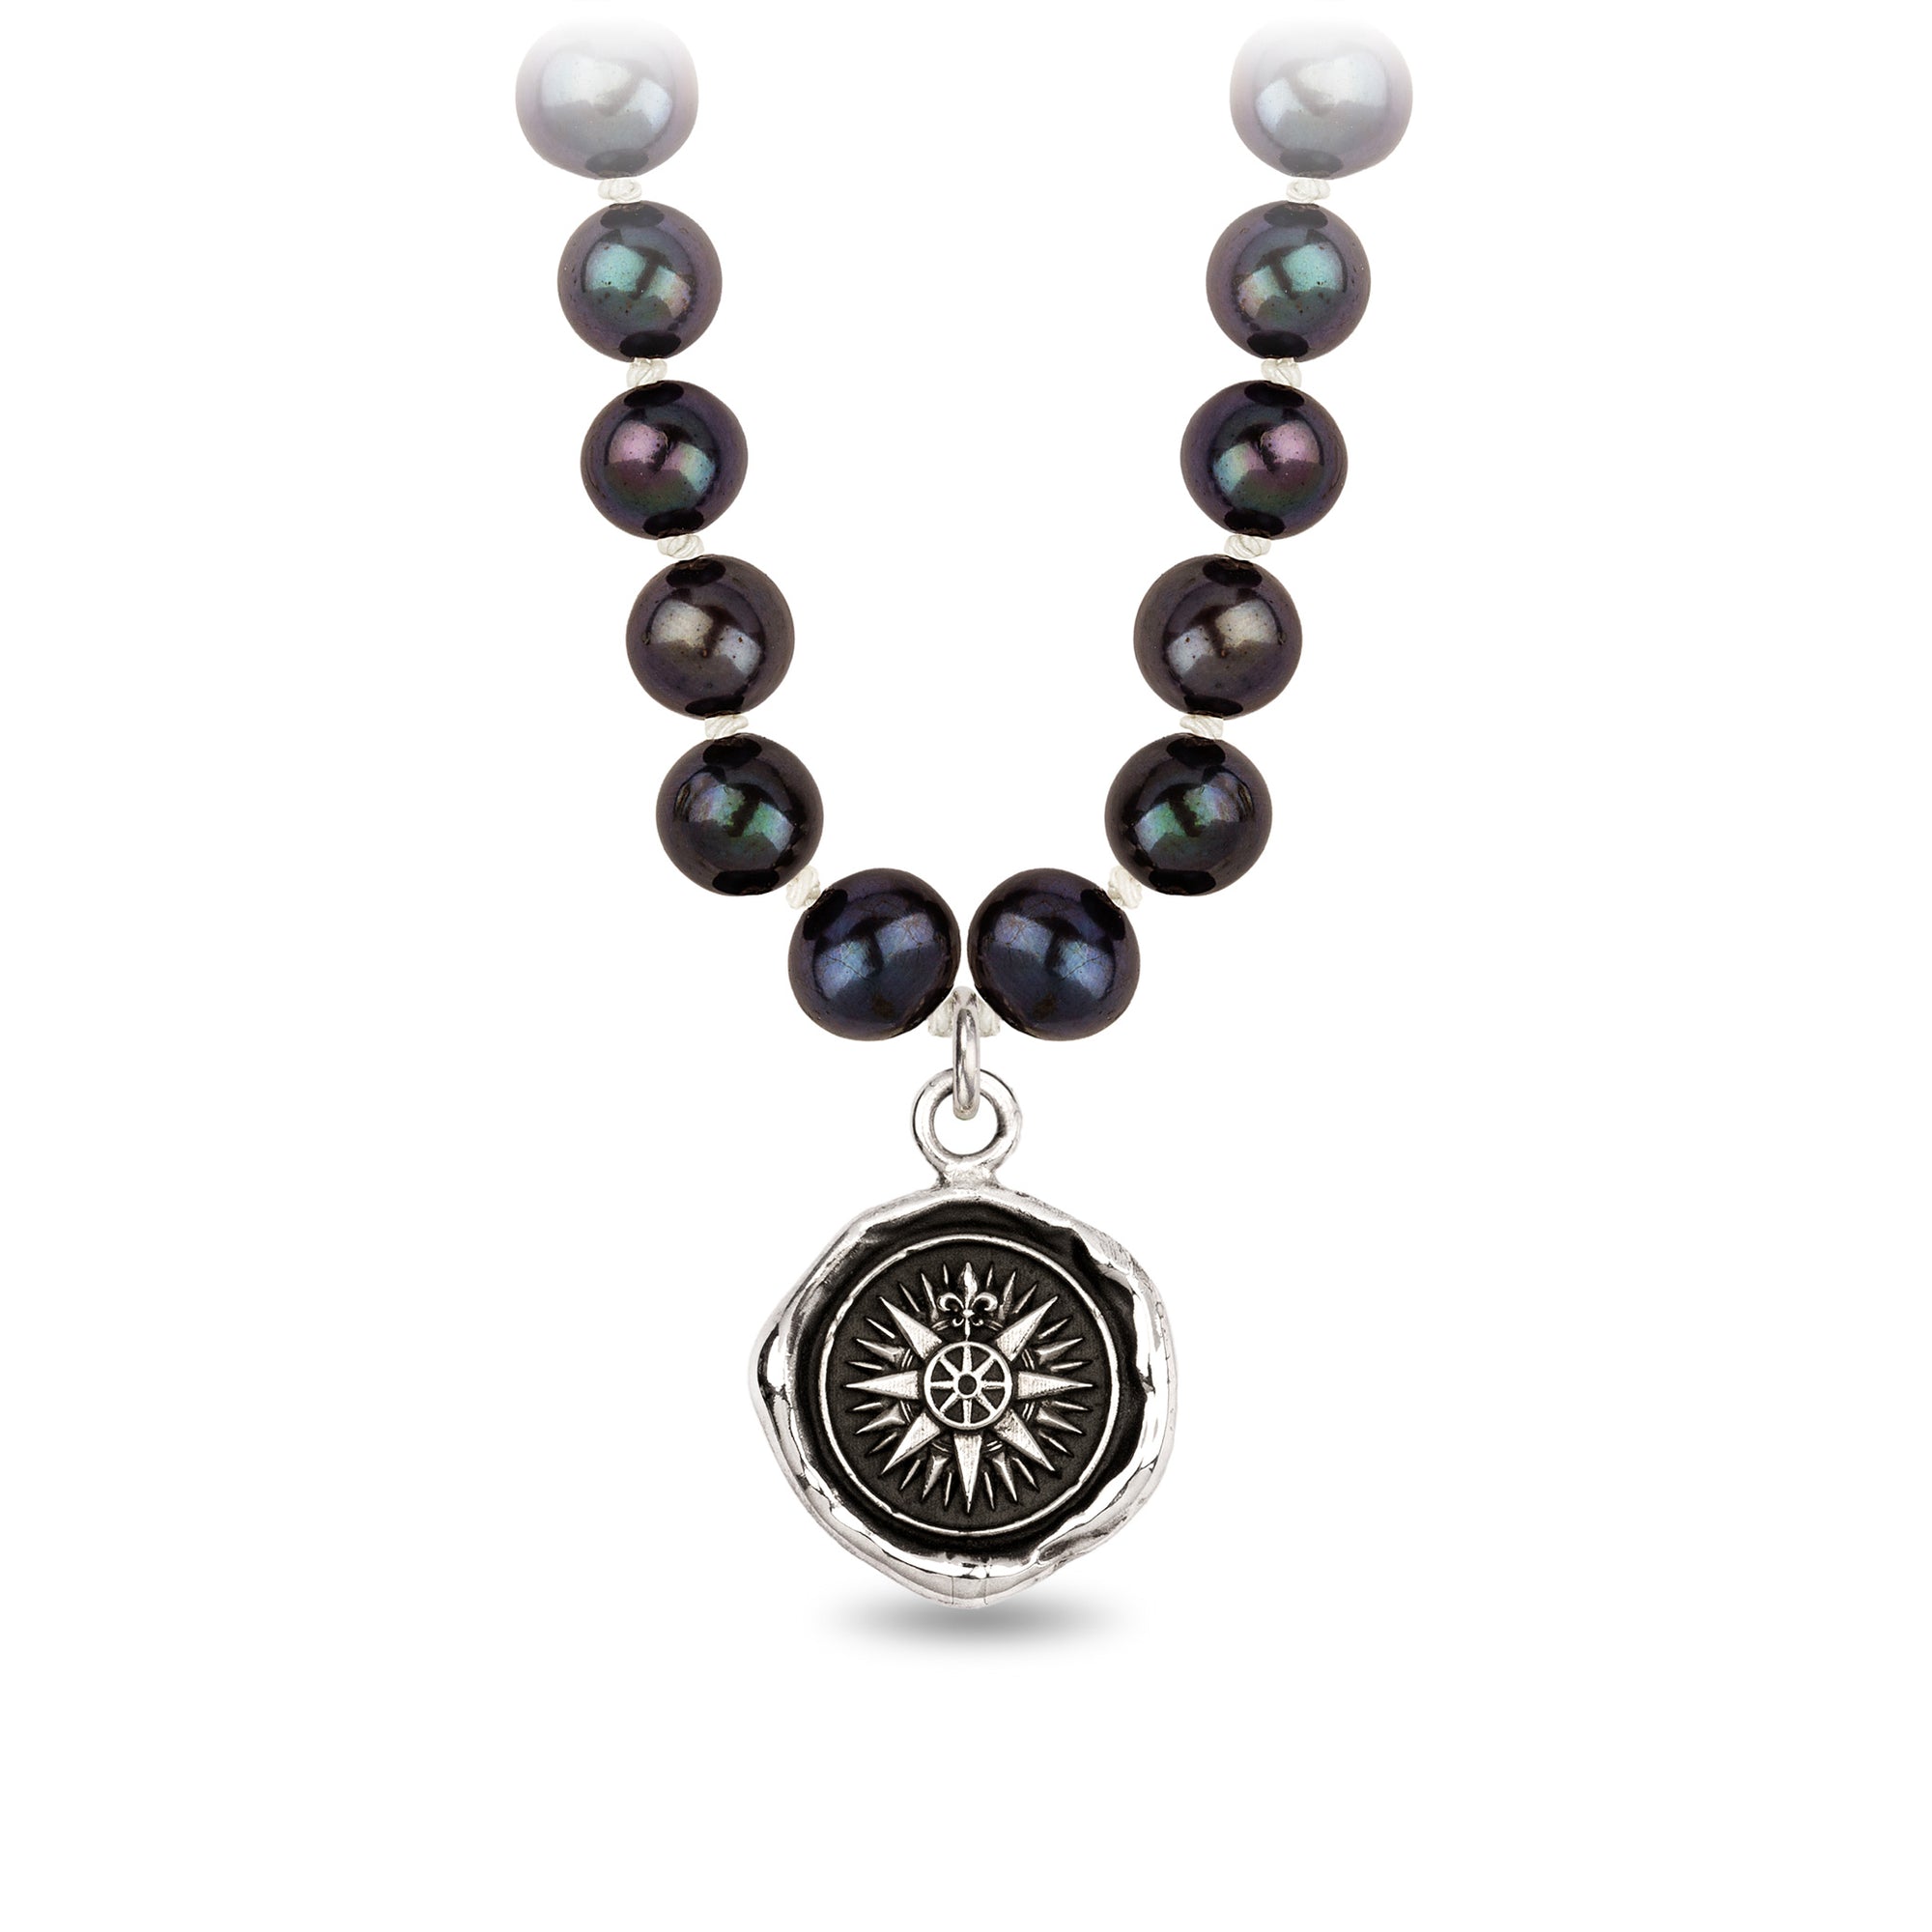 Direction Freshwater Pearl Necklace - Peacock Black